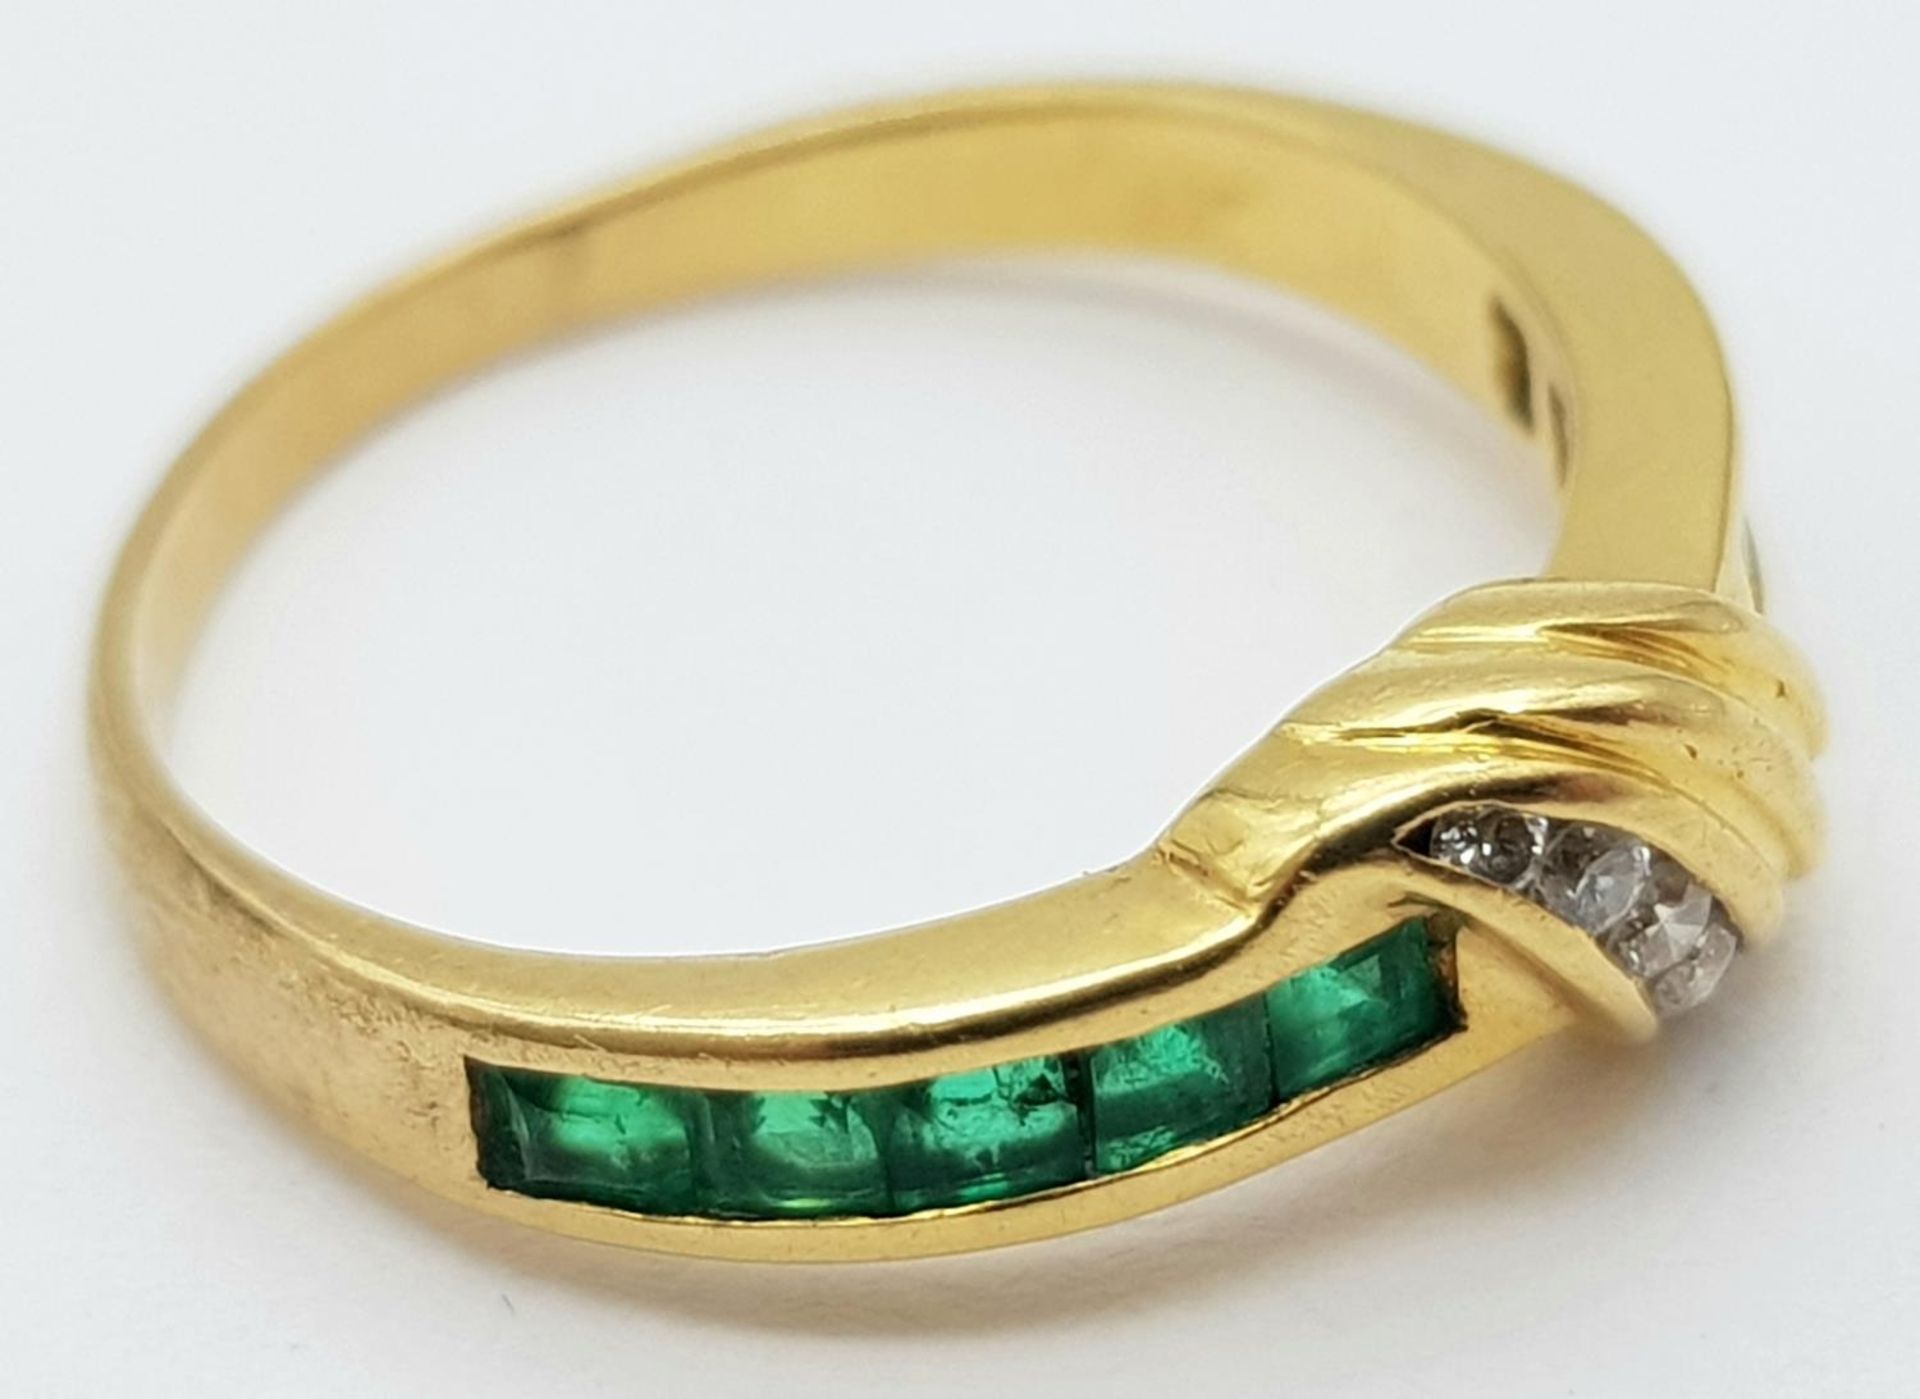 AN 18K YELLOW GOLD DIAMOND & EMERALD RING. Size J, 2.3g total weight. Ref: SC 9052 - Image 4 of 6